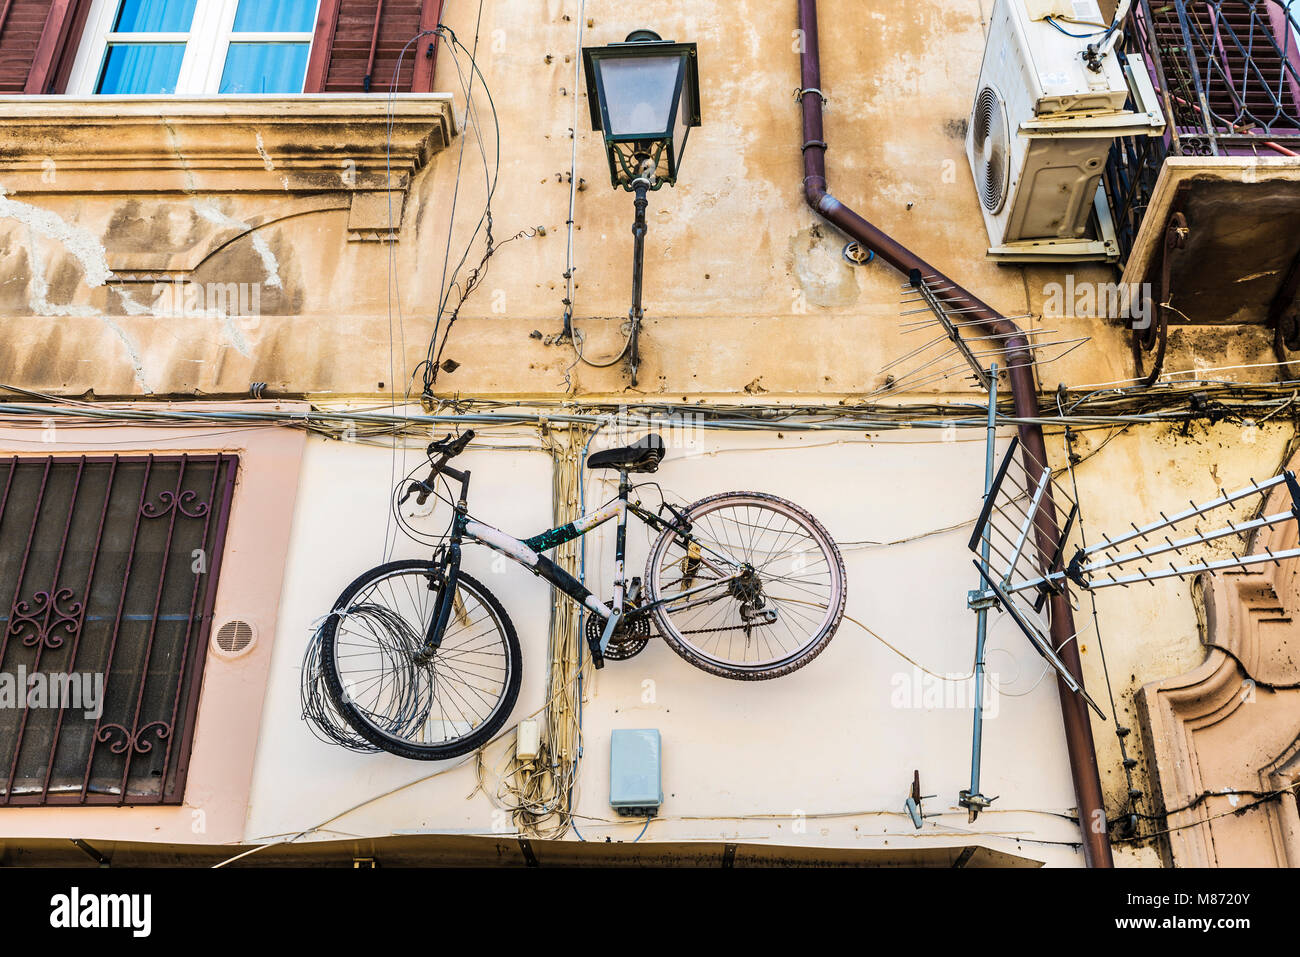 Bicycle hanging next to a television antenna on the wall of the facade of an old building in the old town of Palermo in Sicily, Italy Stock Photo